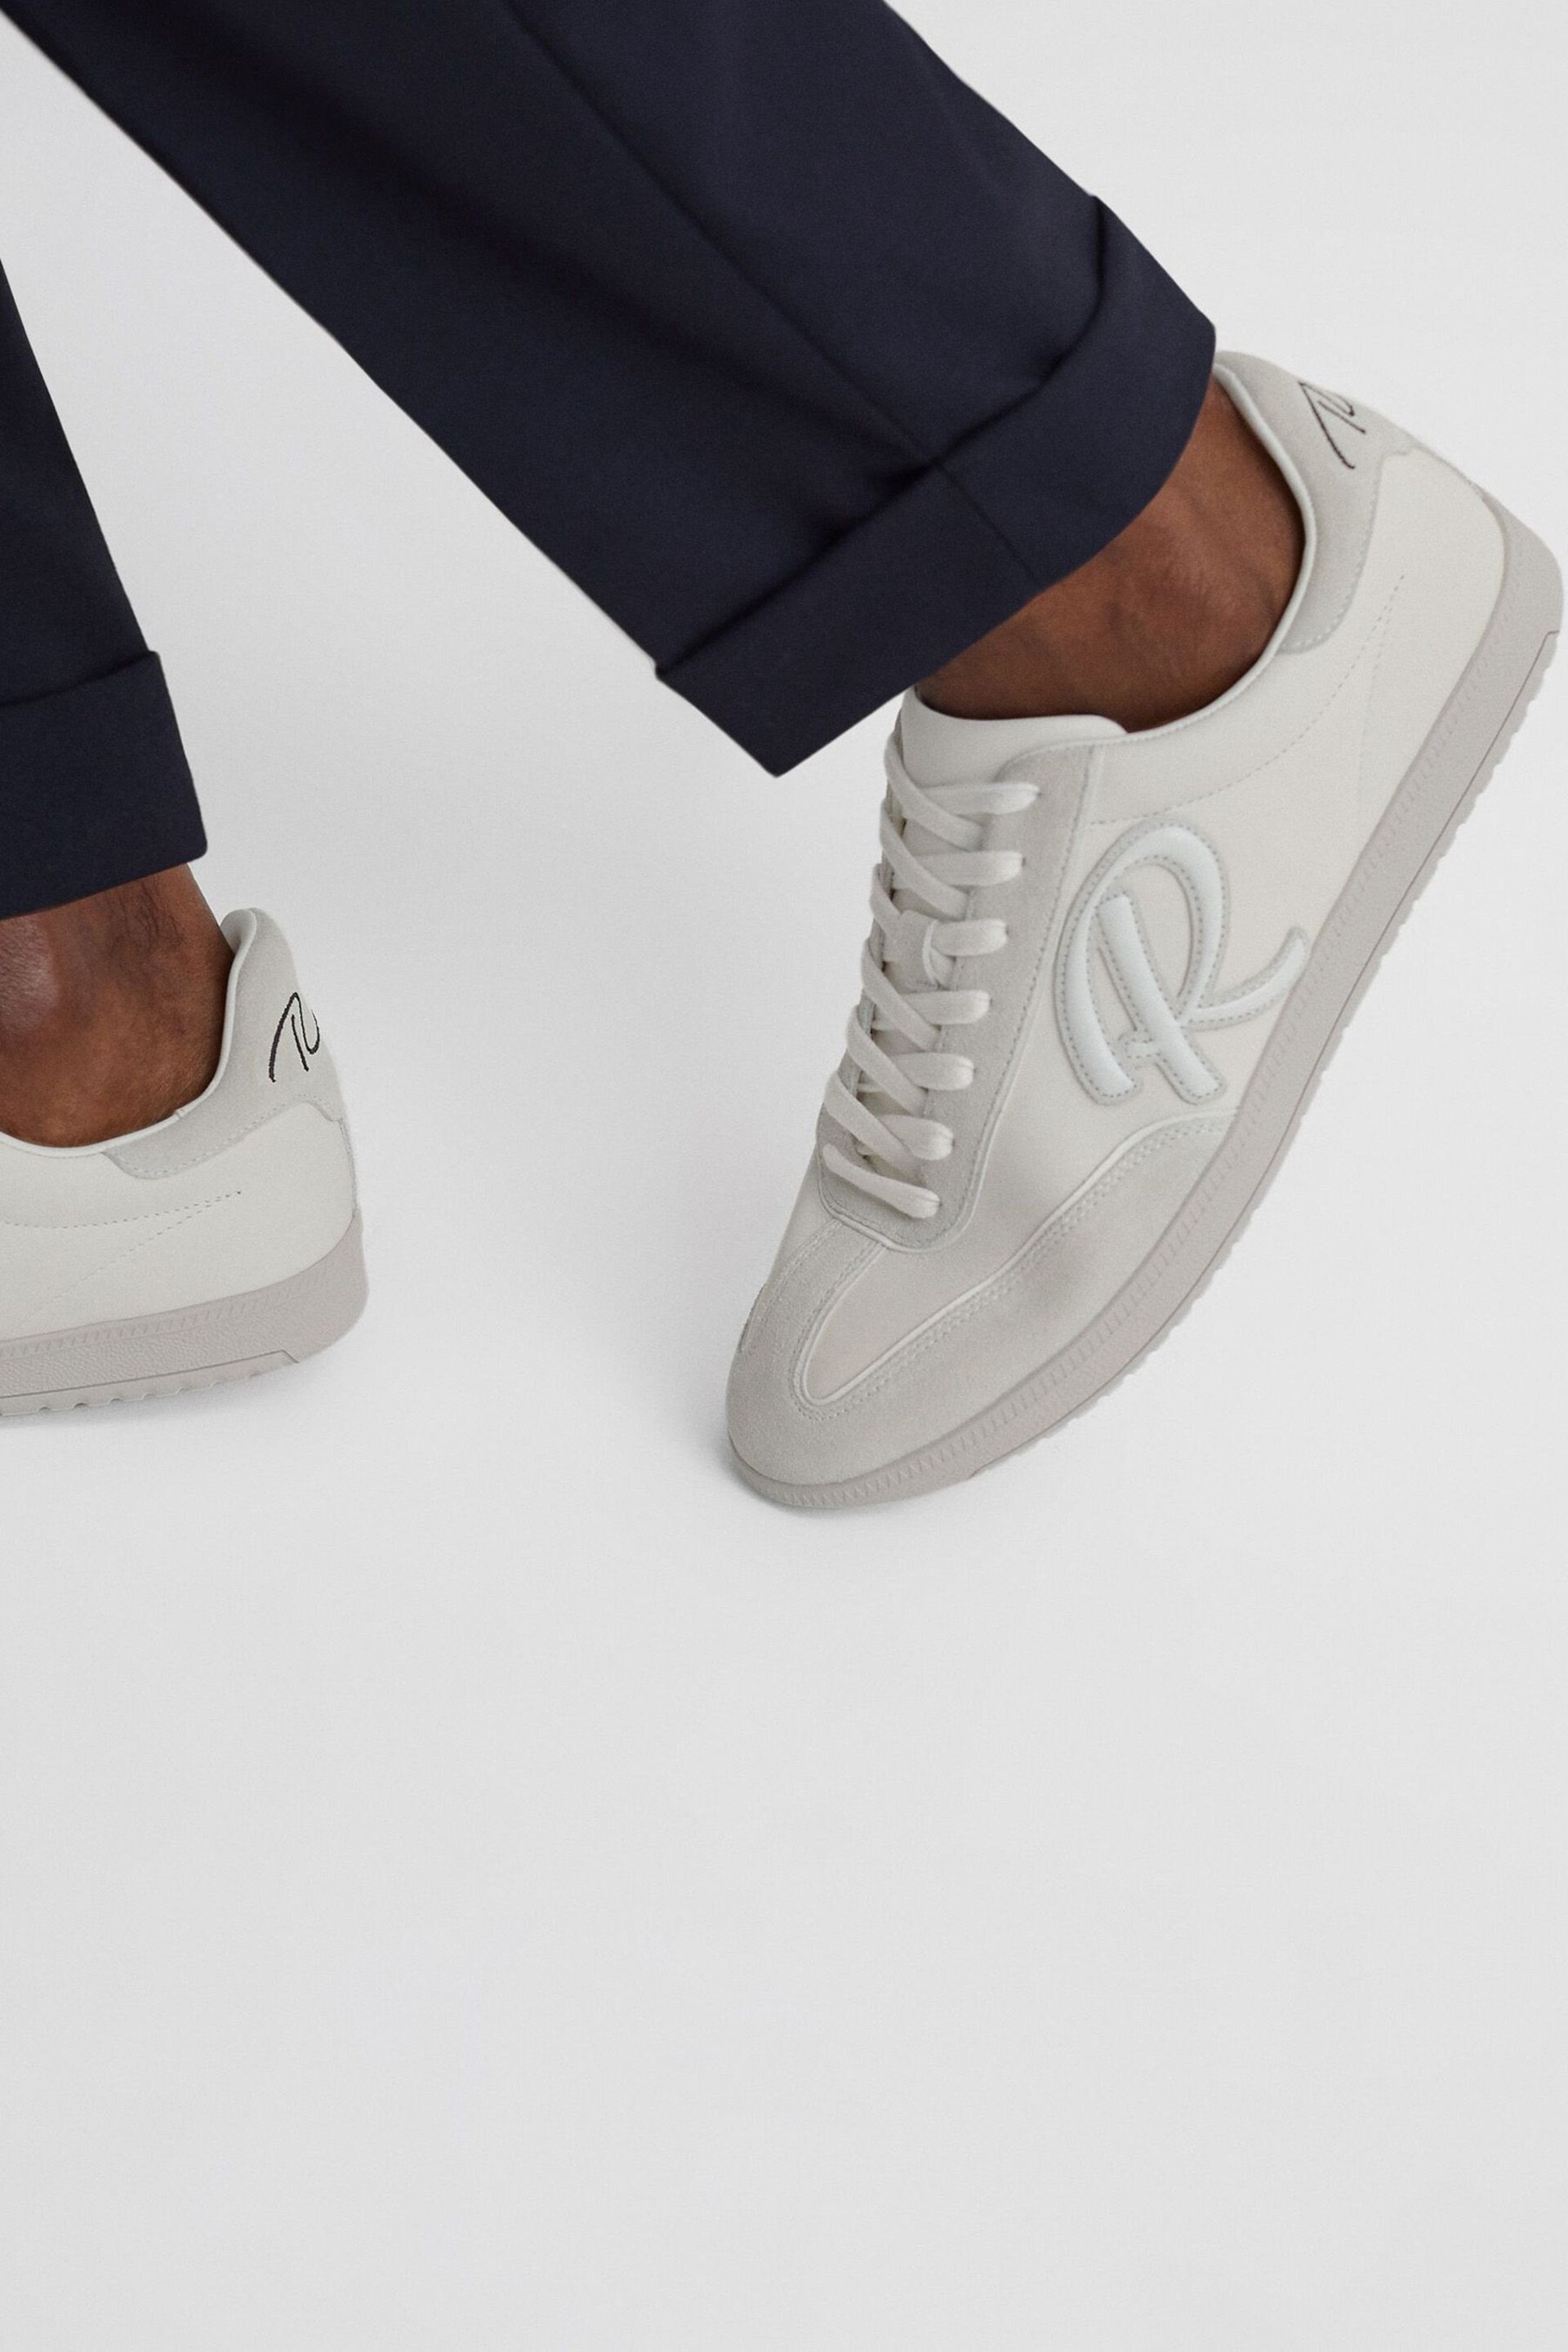 Reiss White Alba Leather-Suede Low Trainers - Image 3 of 6